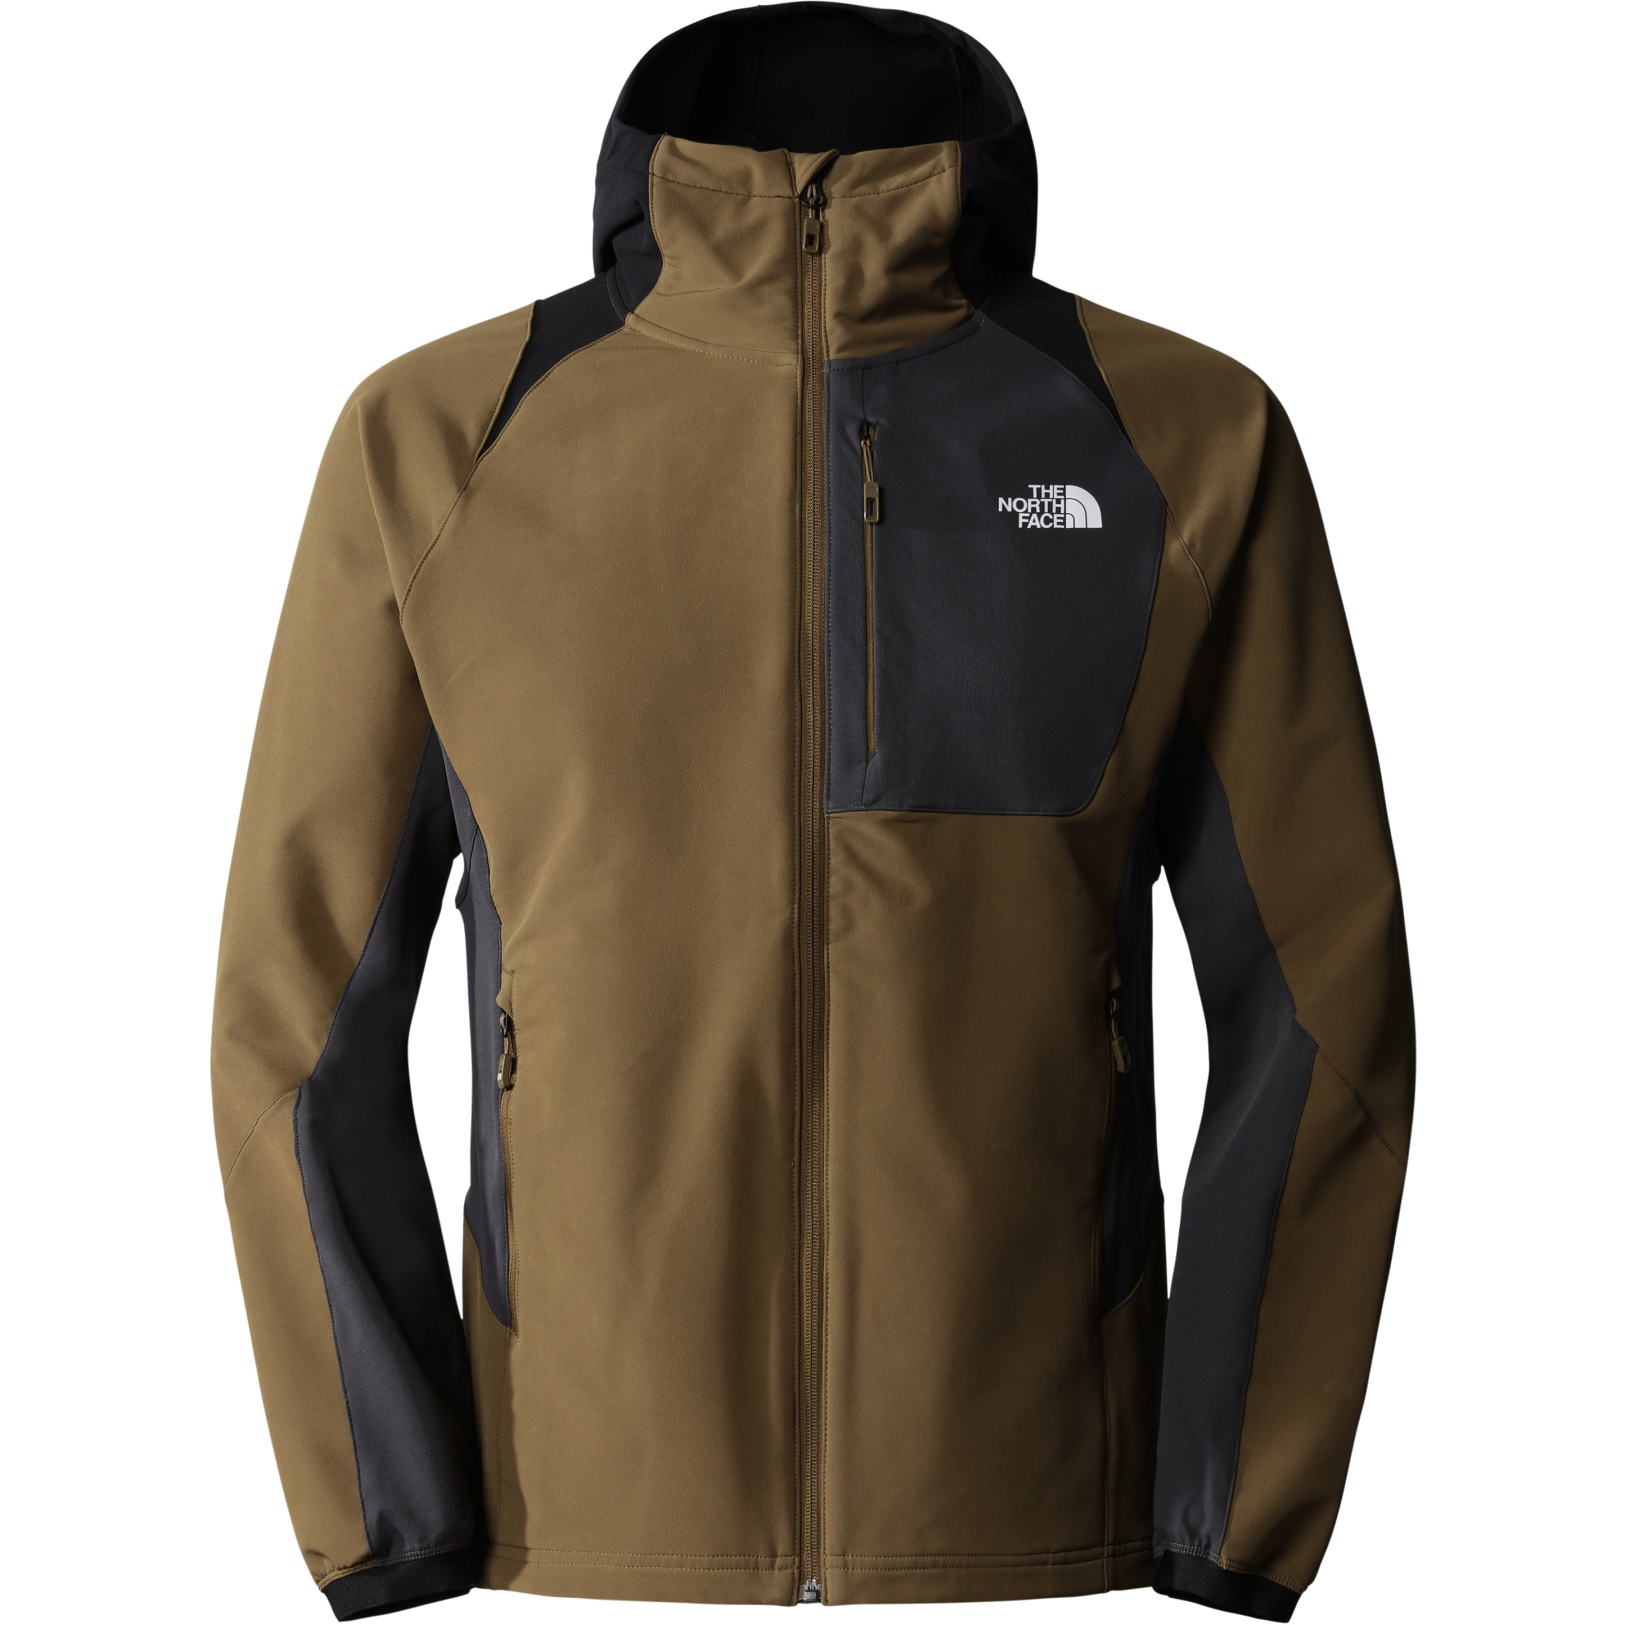 Leeuw passagier Allergie The North Face Men's Athletic Outdoor Softshell Hoodie - Military  Olive/Asphalt Grey/TNF Black